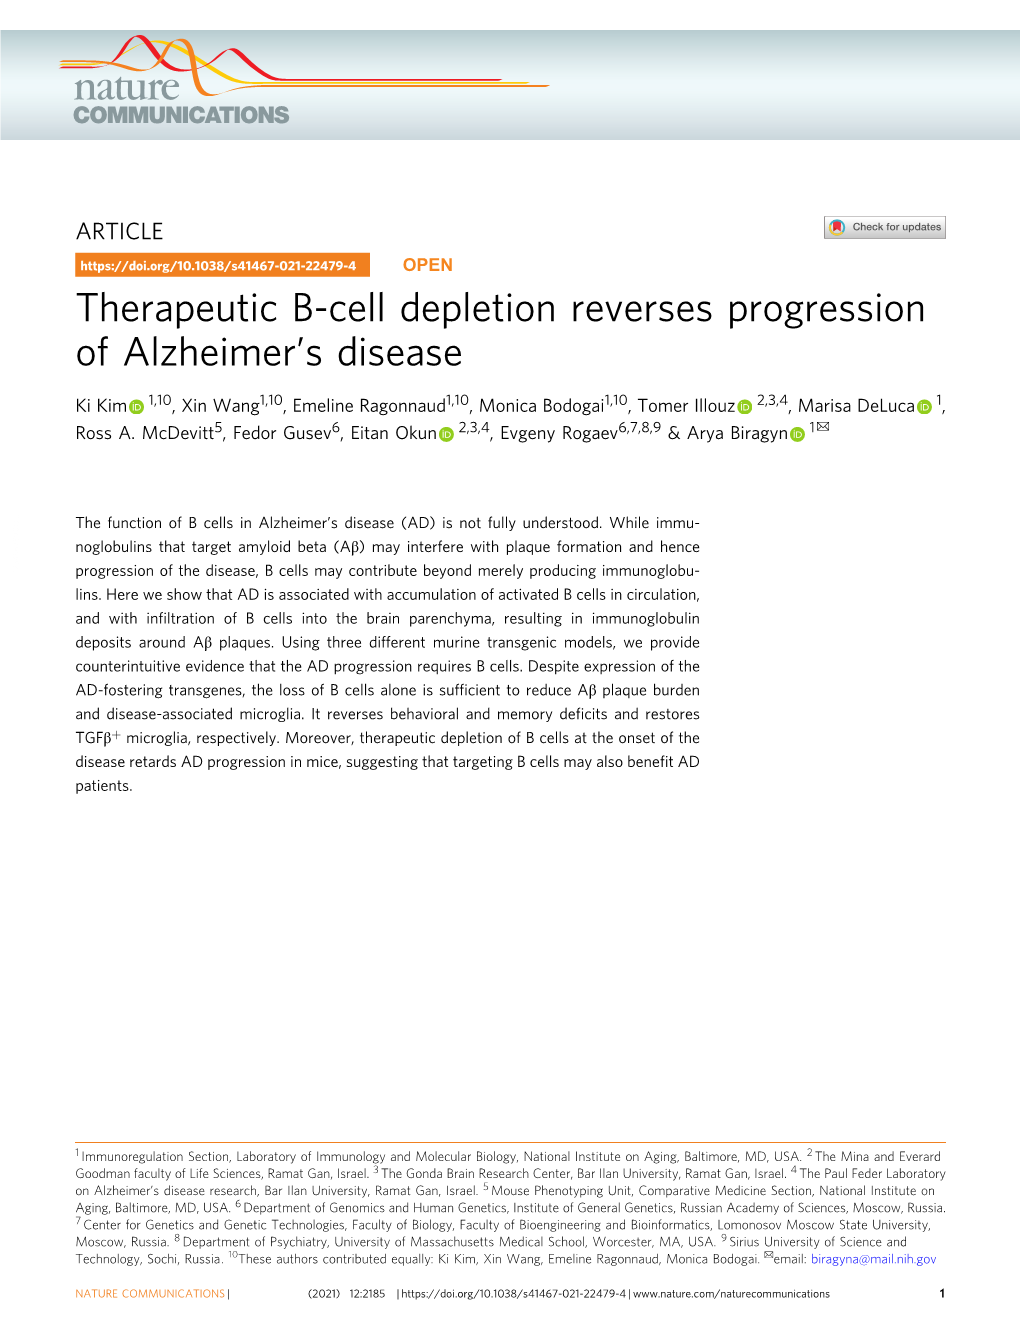 Therapeutic B-Cell Depletion Reverses Progression of Alzheimerâ